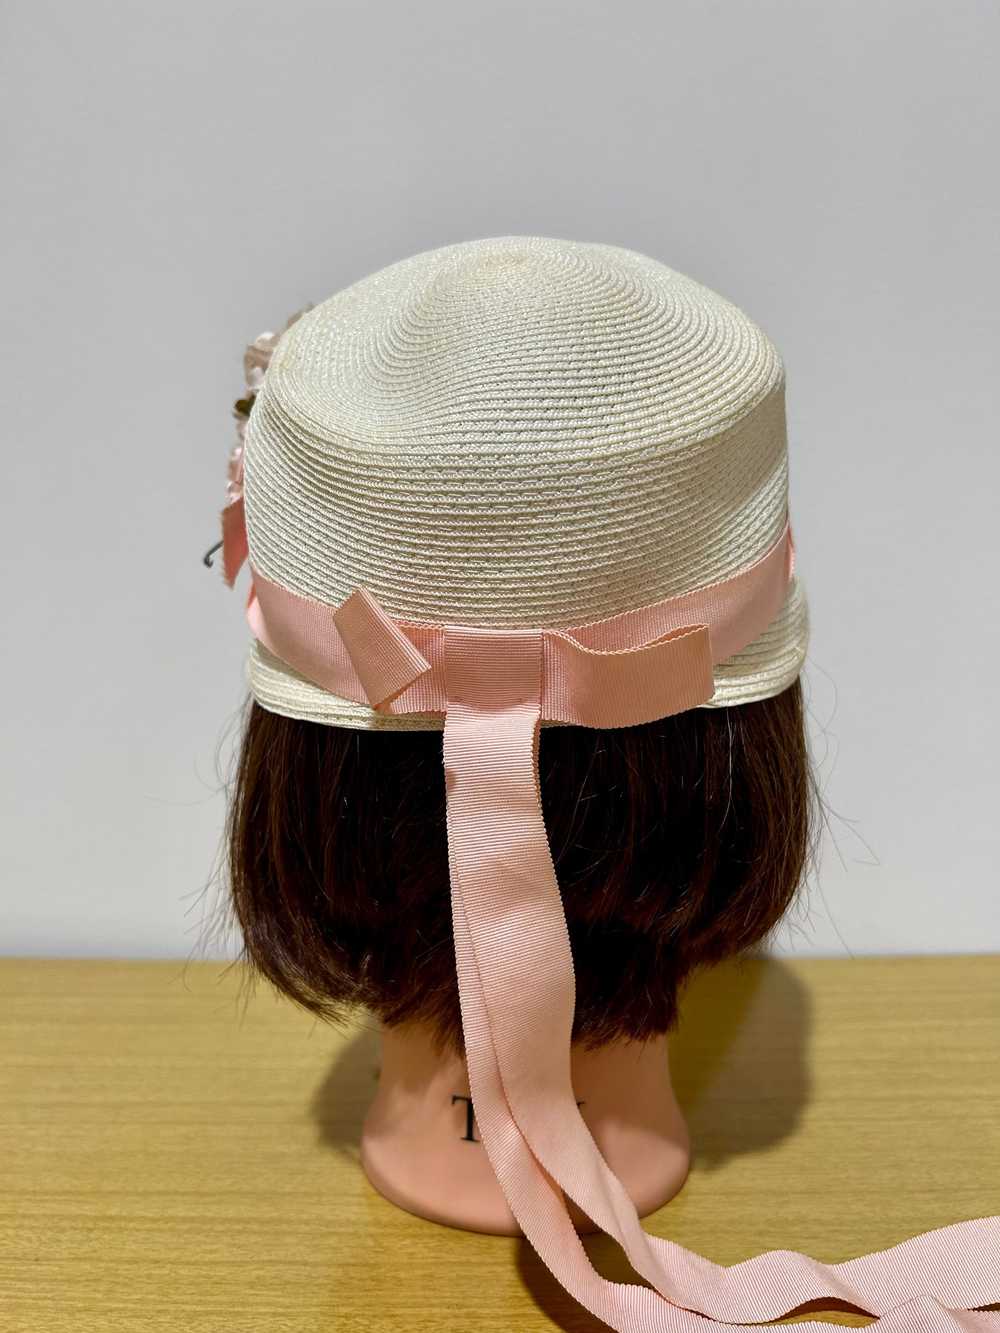 Vintage Sun Hat with Pink Ribbon and Flowers - image 4